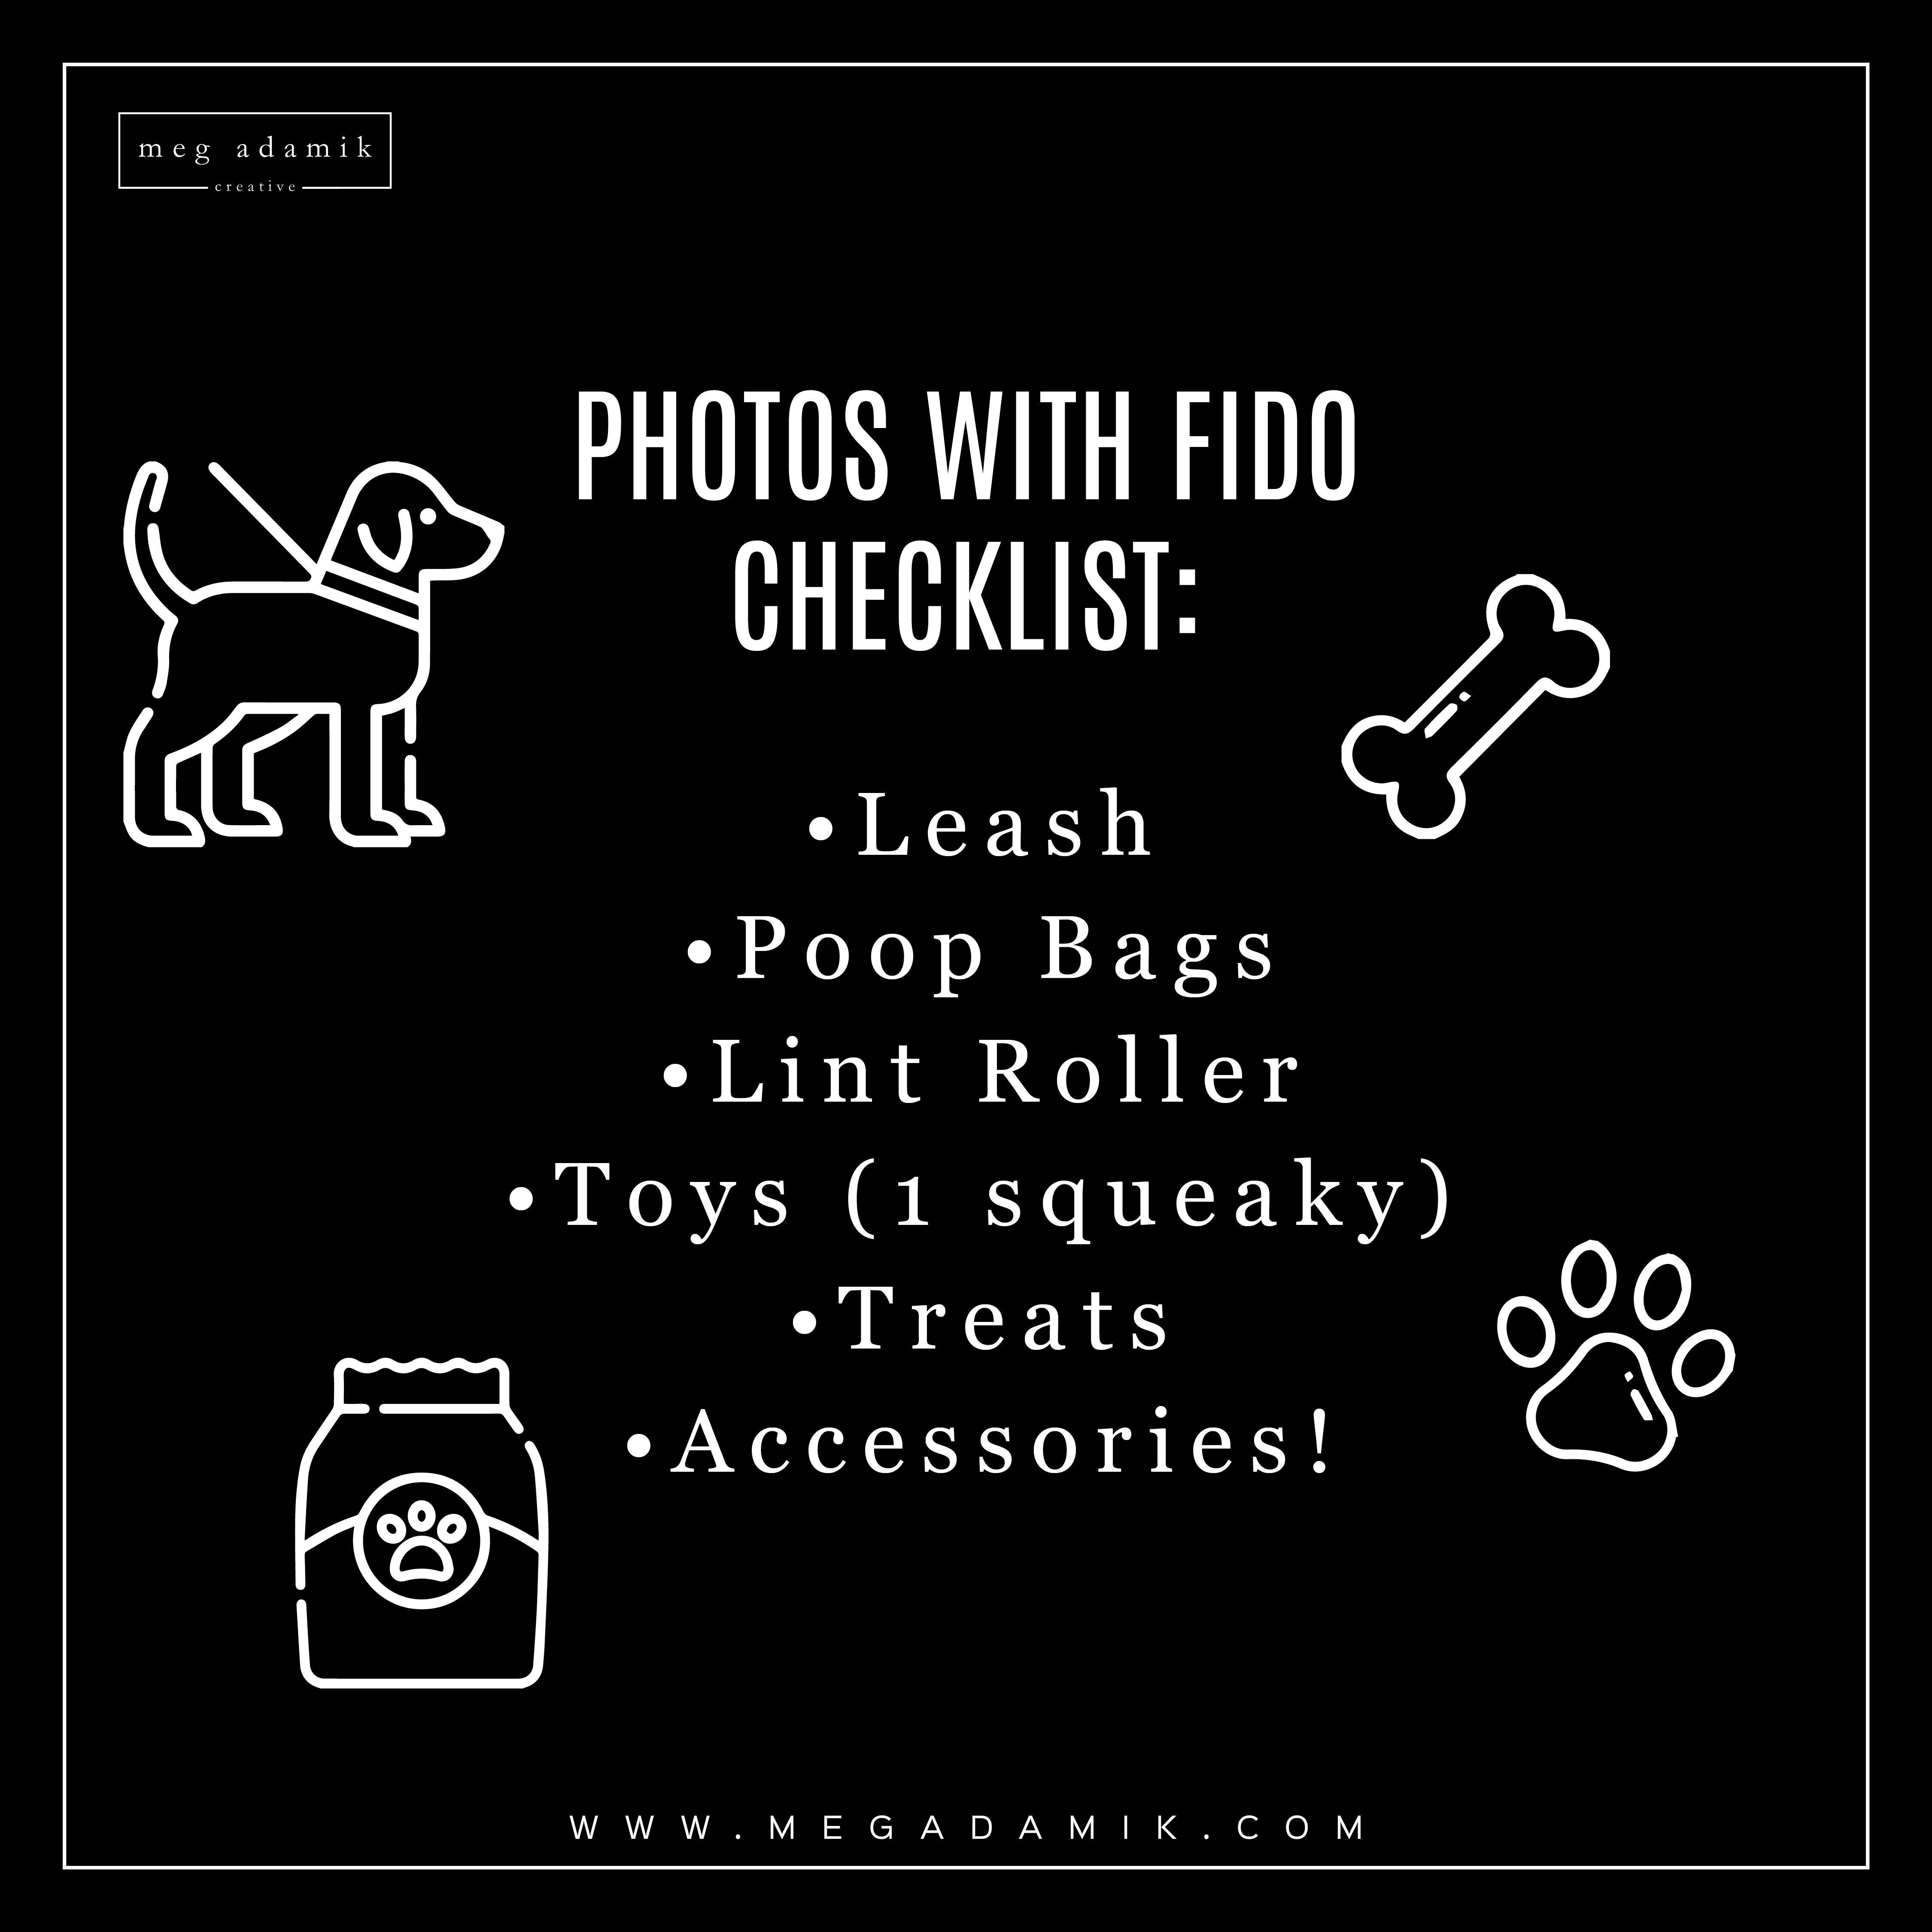 Photos with Dogs Checklist